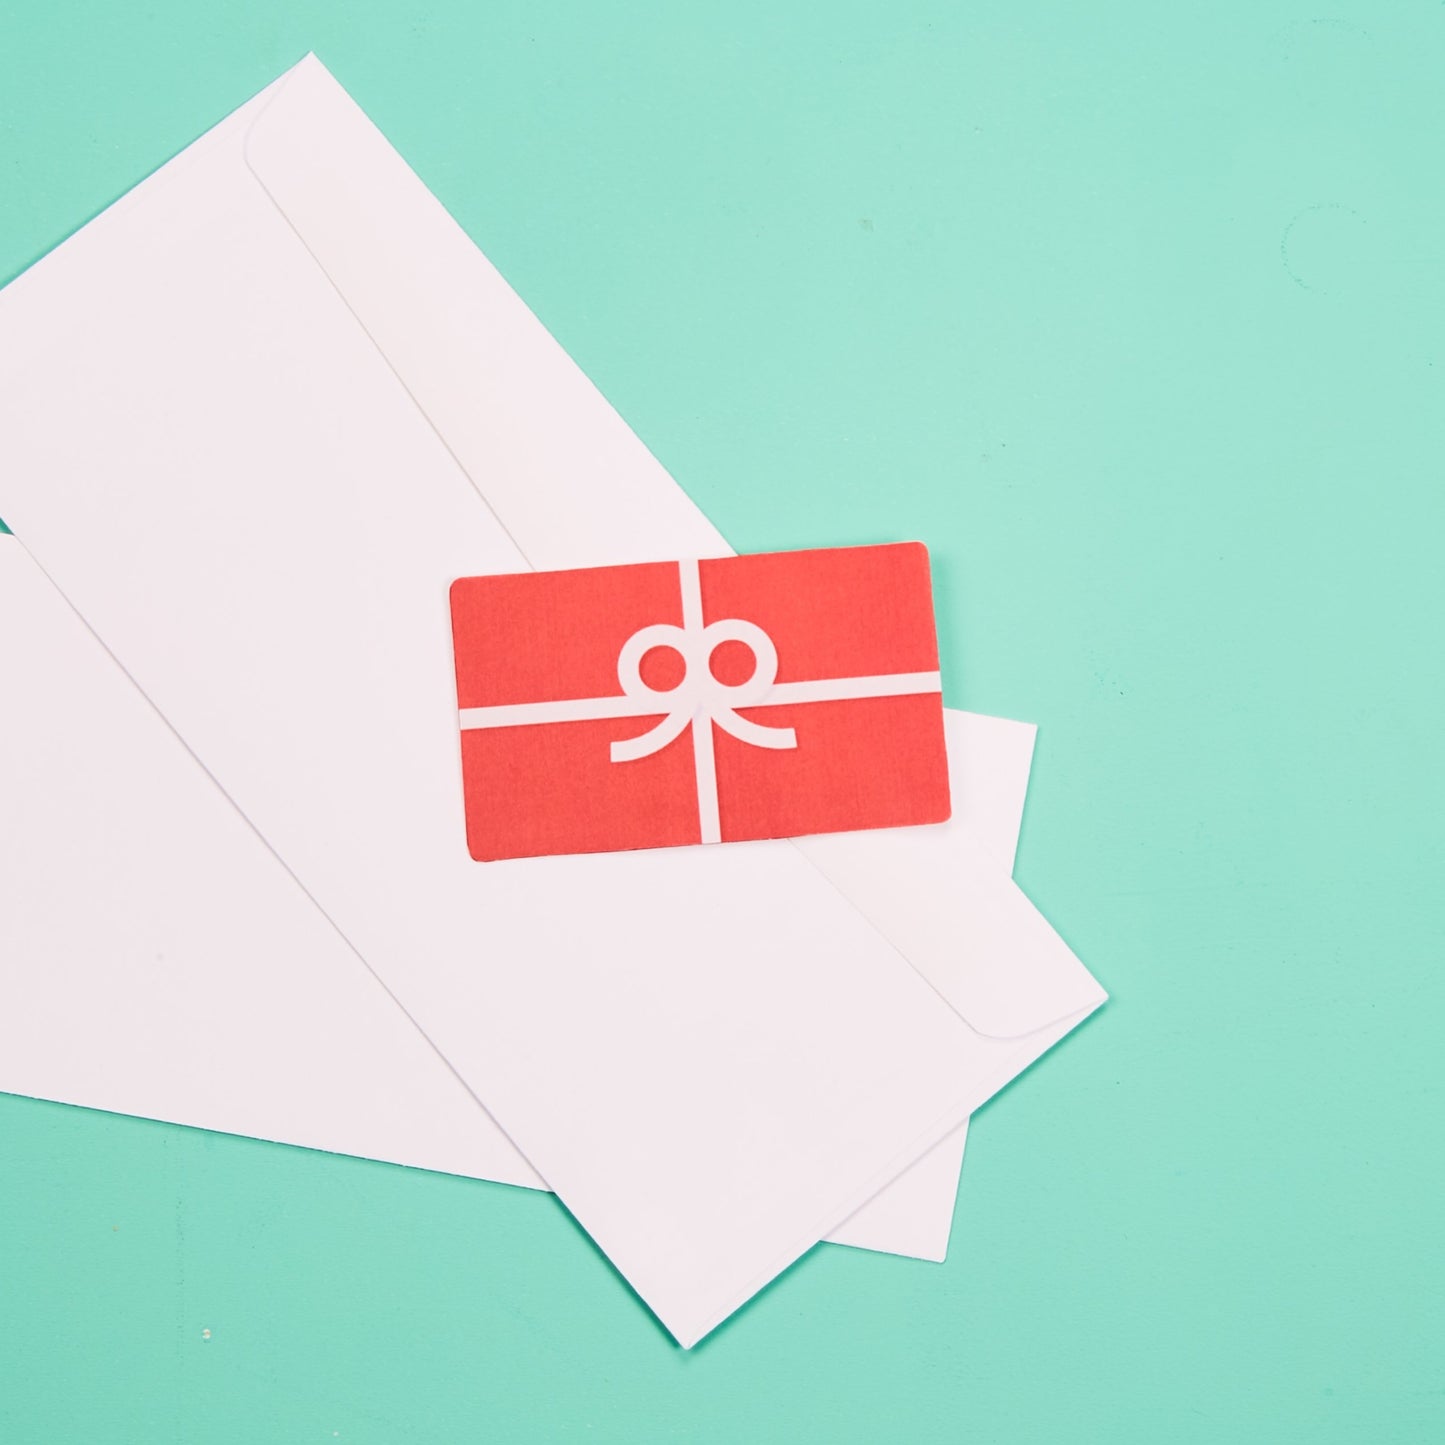 A picture of a bright red gift card laying on white envelops.